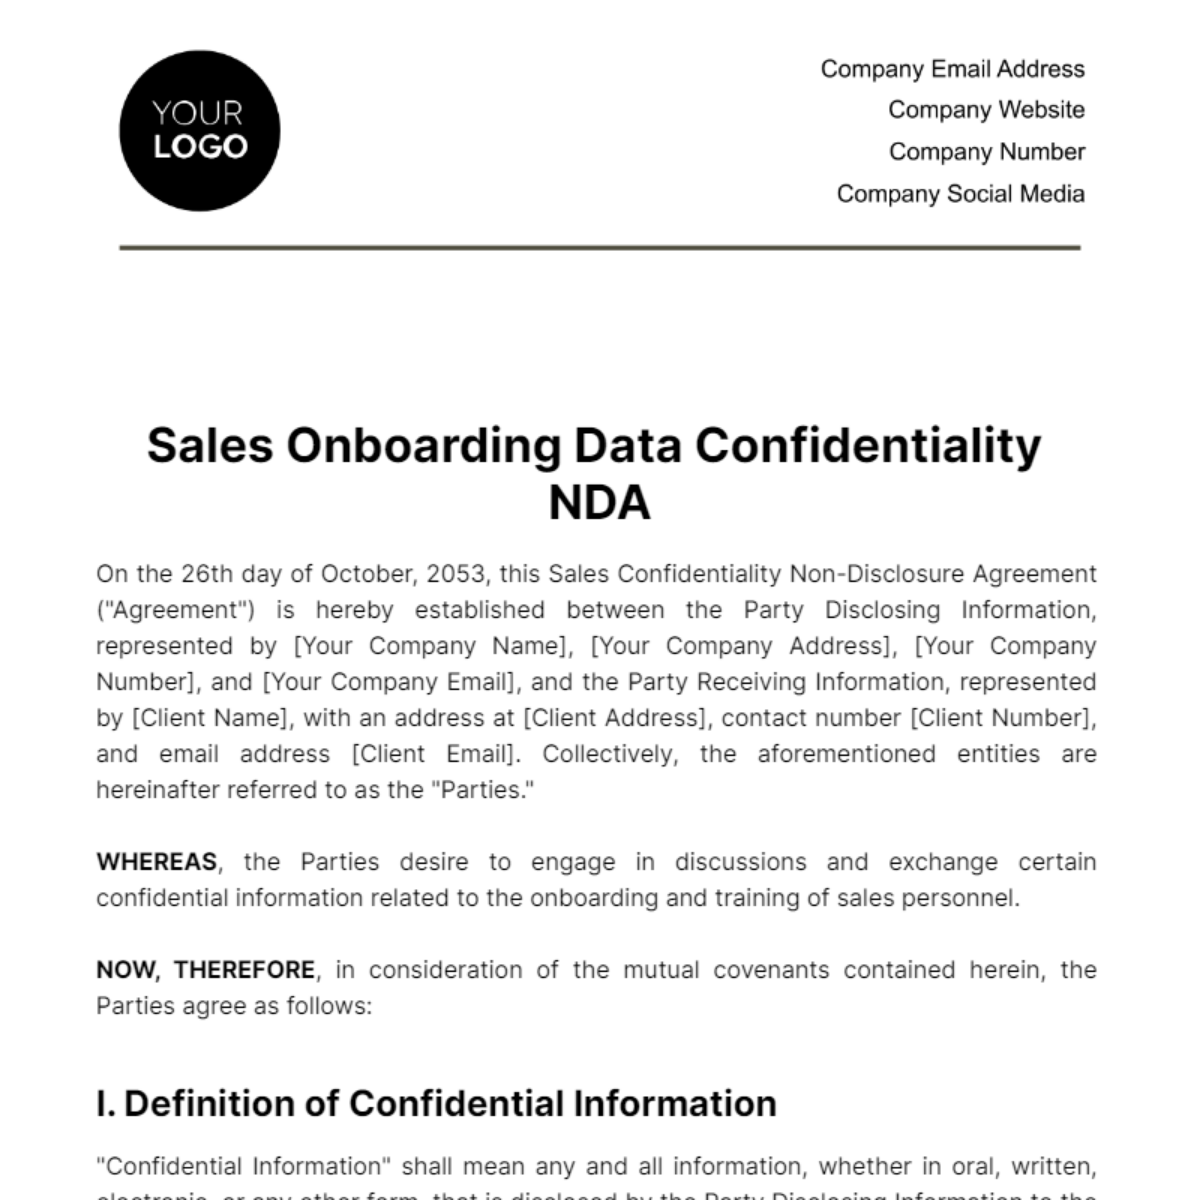 Sales Onboarding Data Confidentiality NDA Template